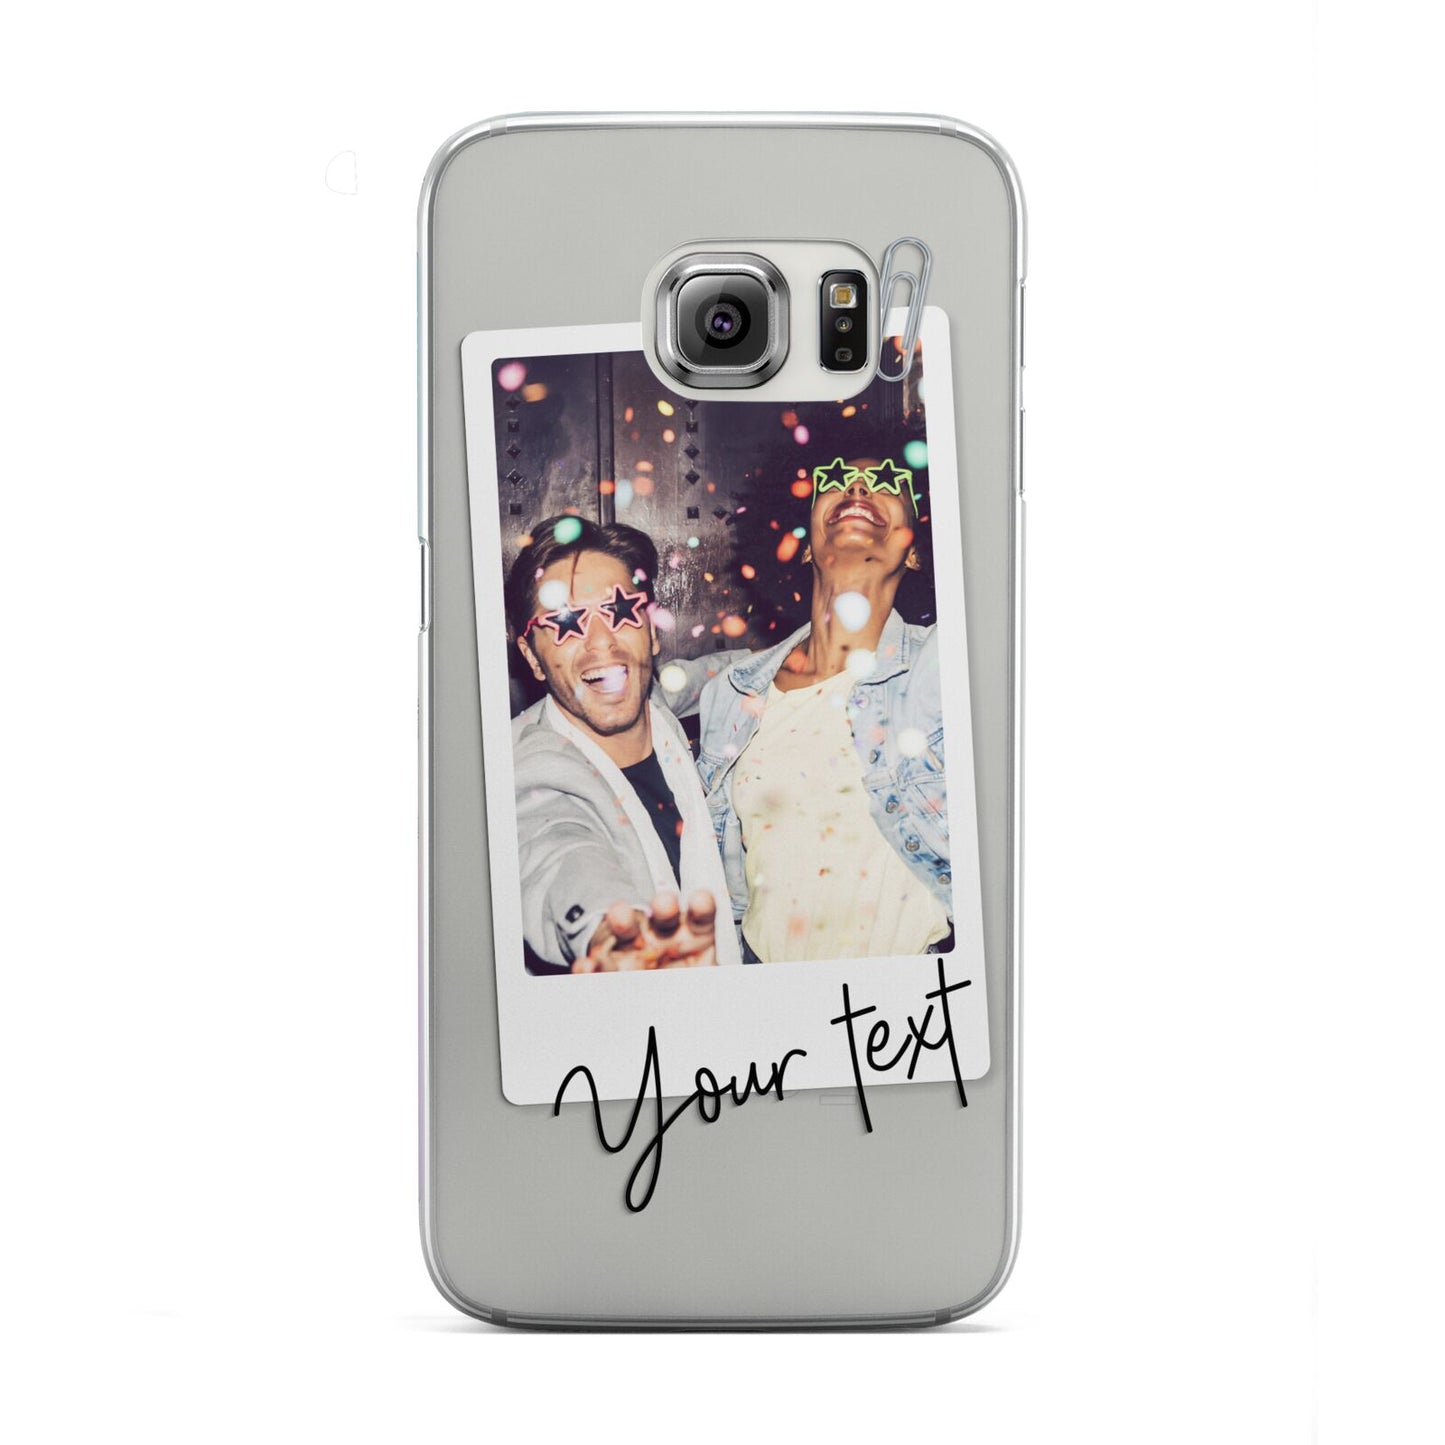 Personalised Photo with Text Samsung Galaxy S6 Edge Case